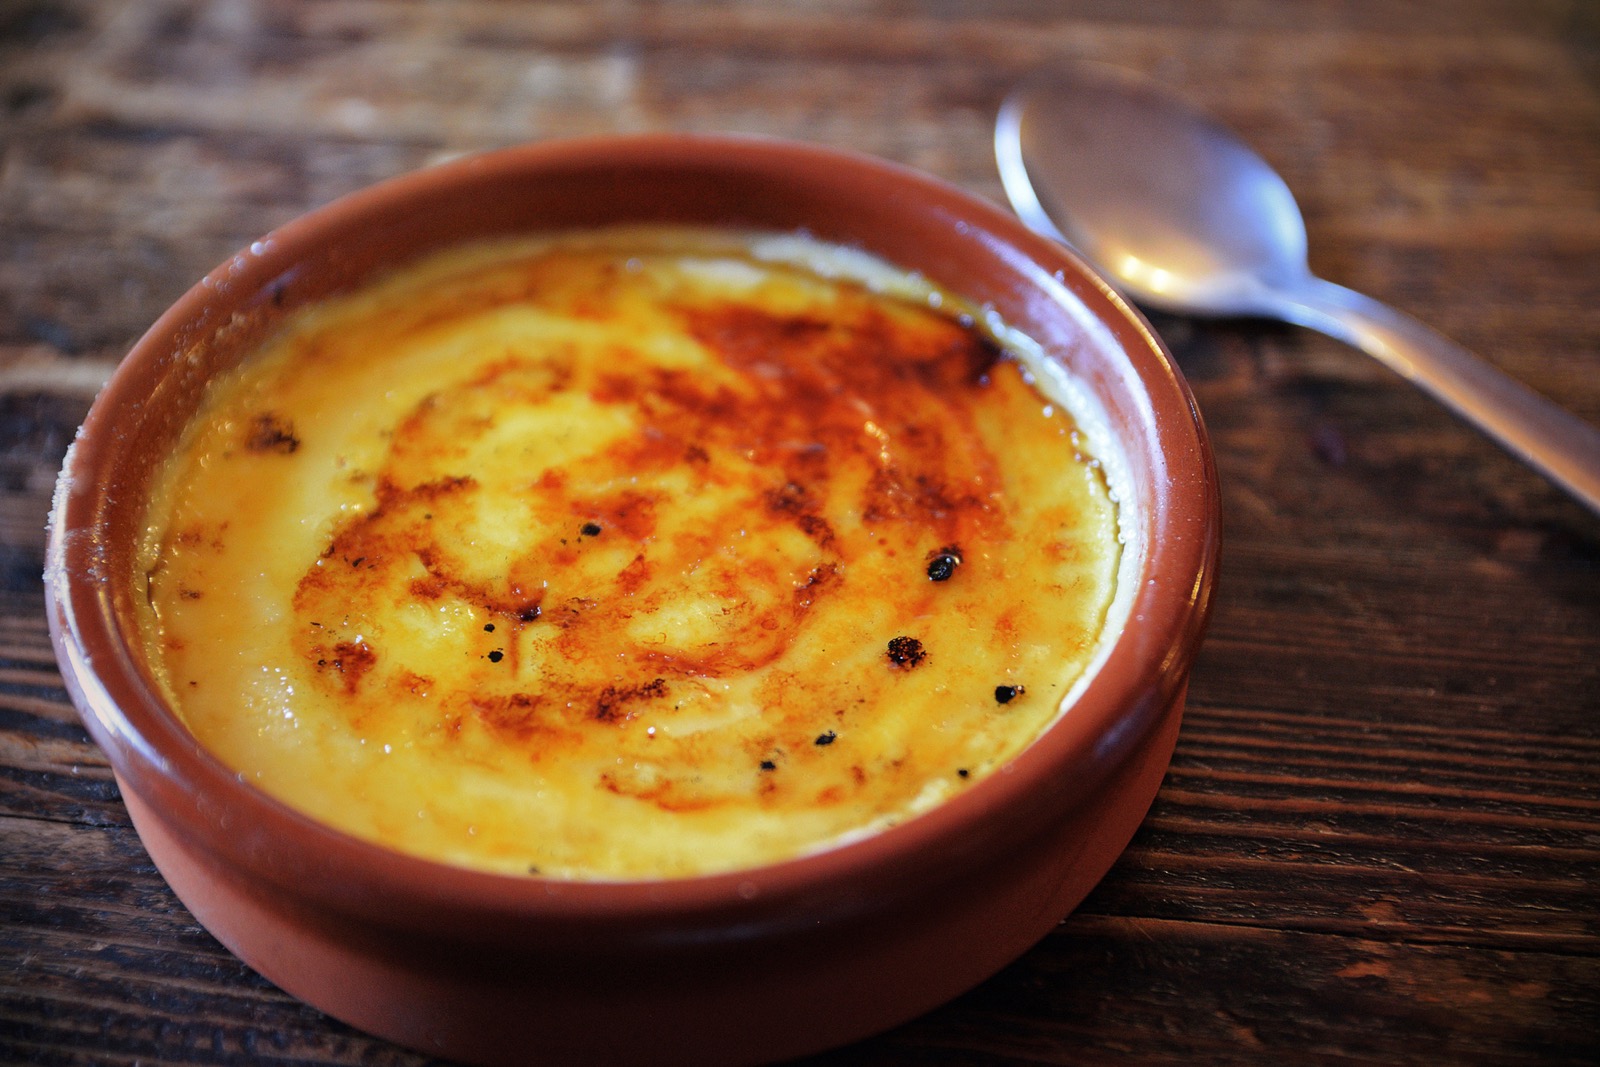 This 22-Question Random Knowledge Test Will Reveal If You Know a Little or a Lot Crema Catalana